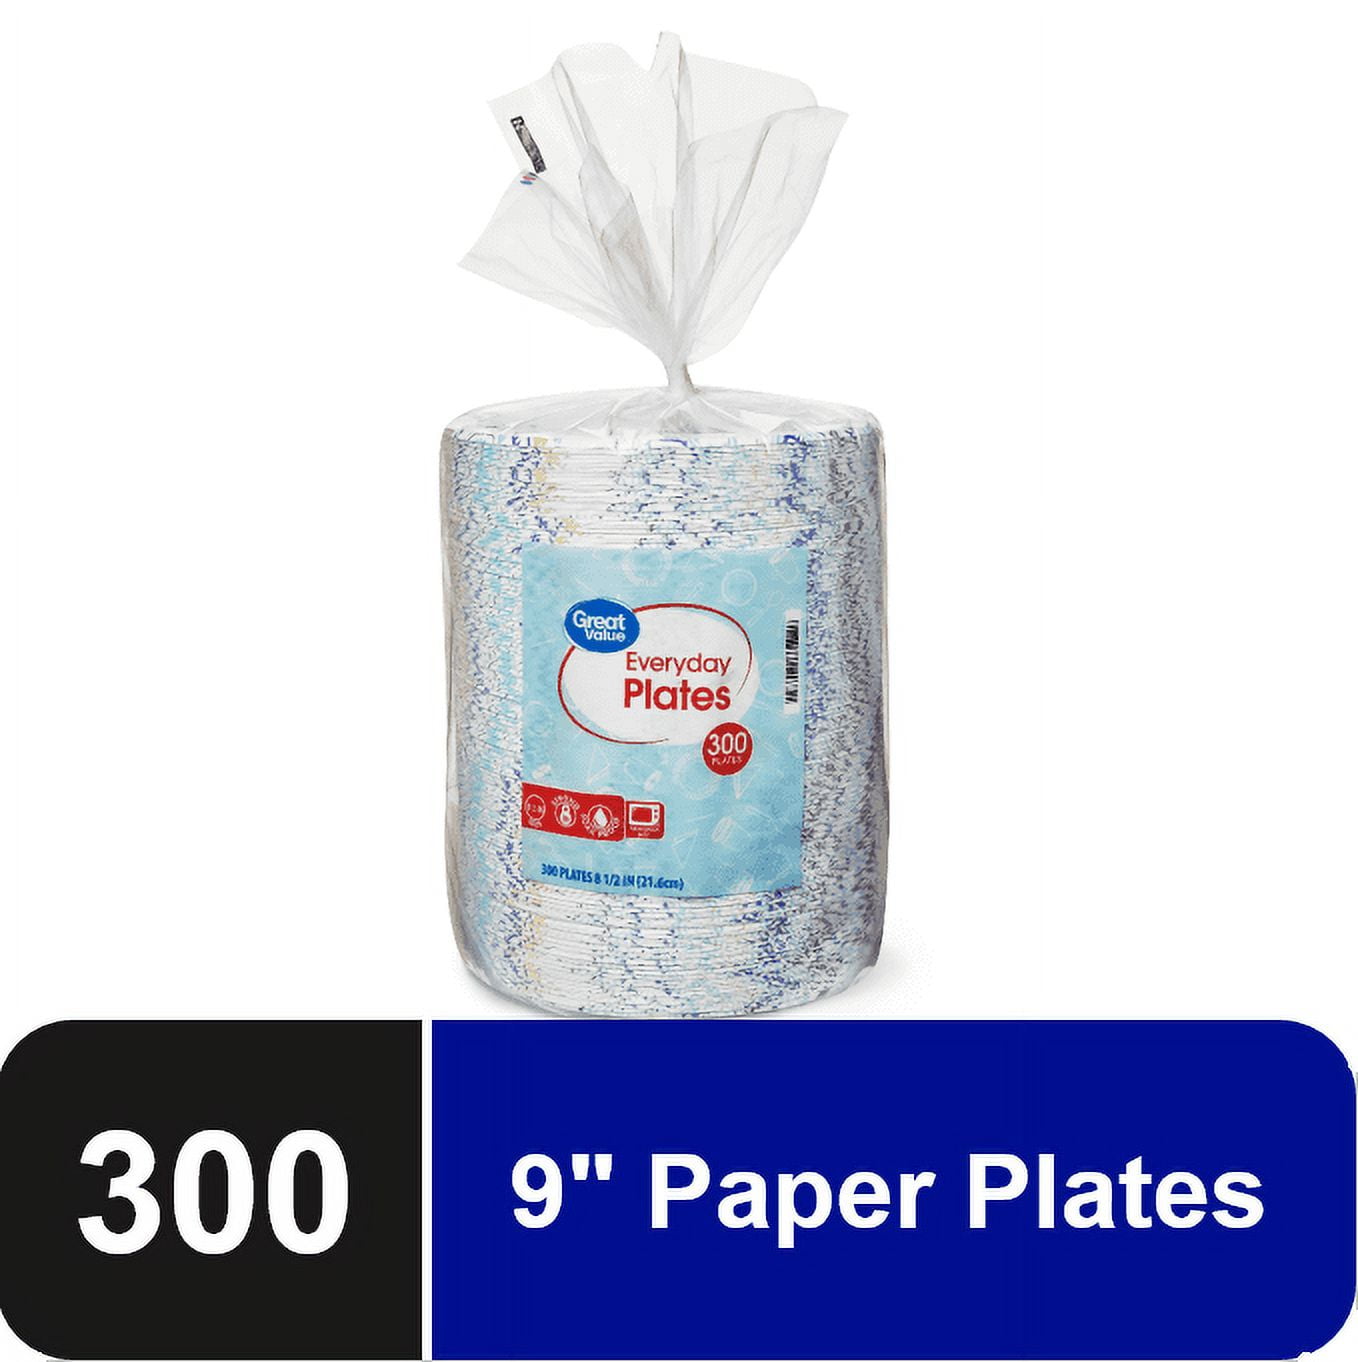  300 Pack 10 Inch Disposable Paper Plates Bulk Tropical Leaves  Paper Plates Round Paper Plates Heavy Duty Paper Plates Soak Proof  Microwave Safe Paper Plates for Lunch Dinner Parties Potlucks (10